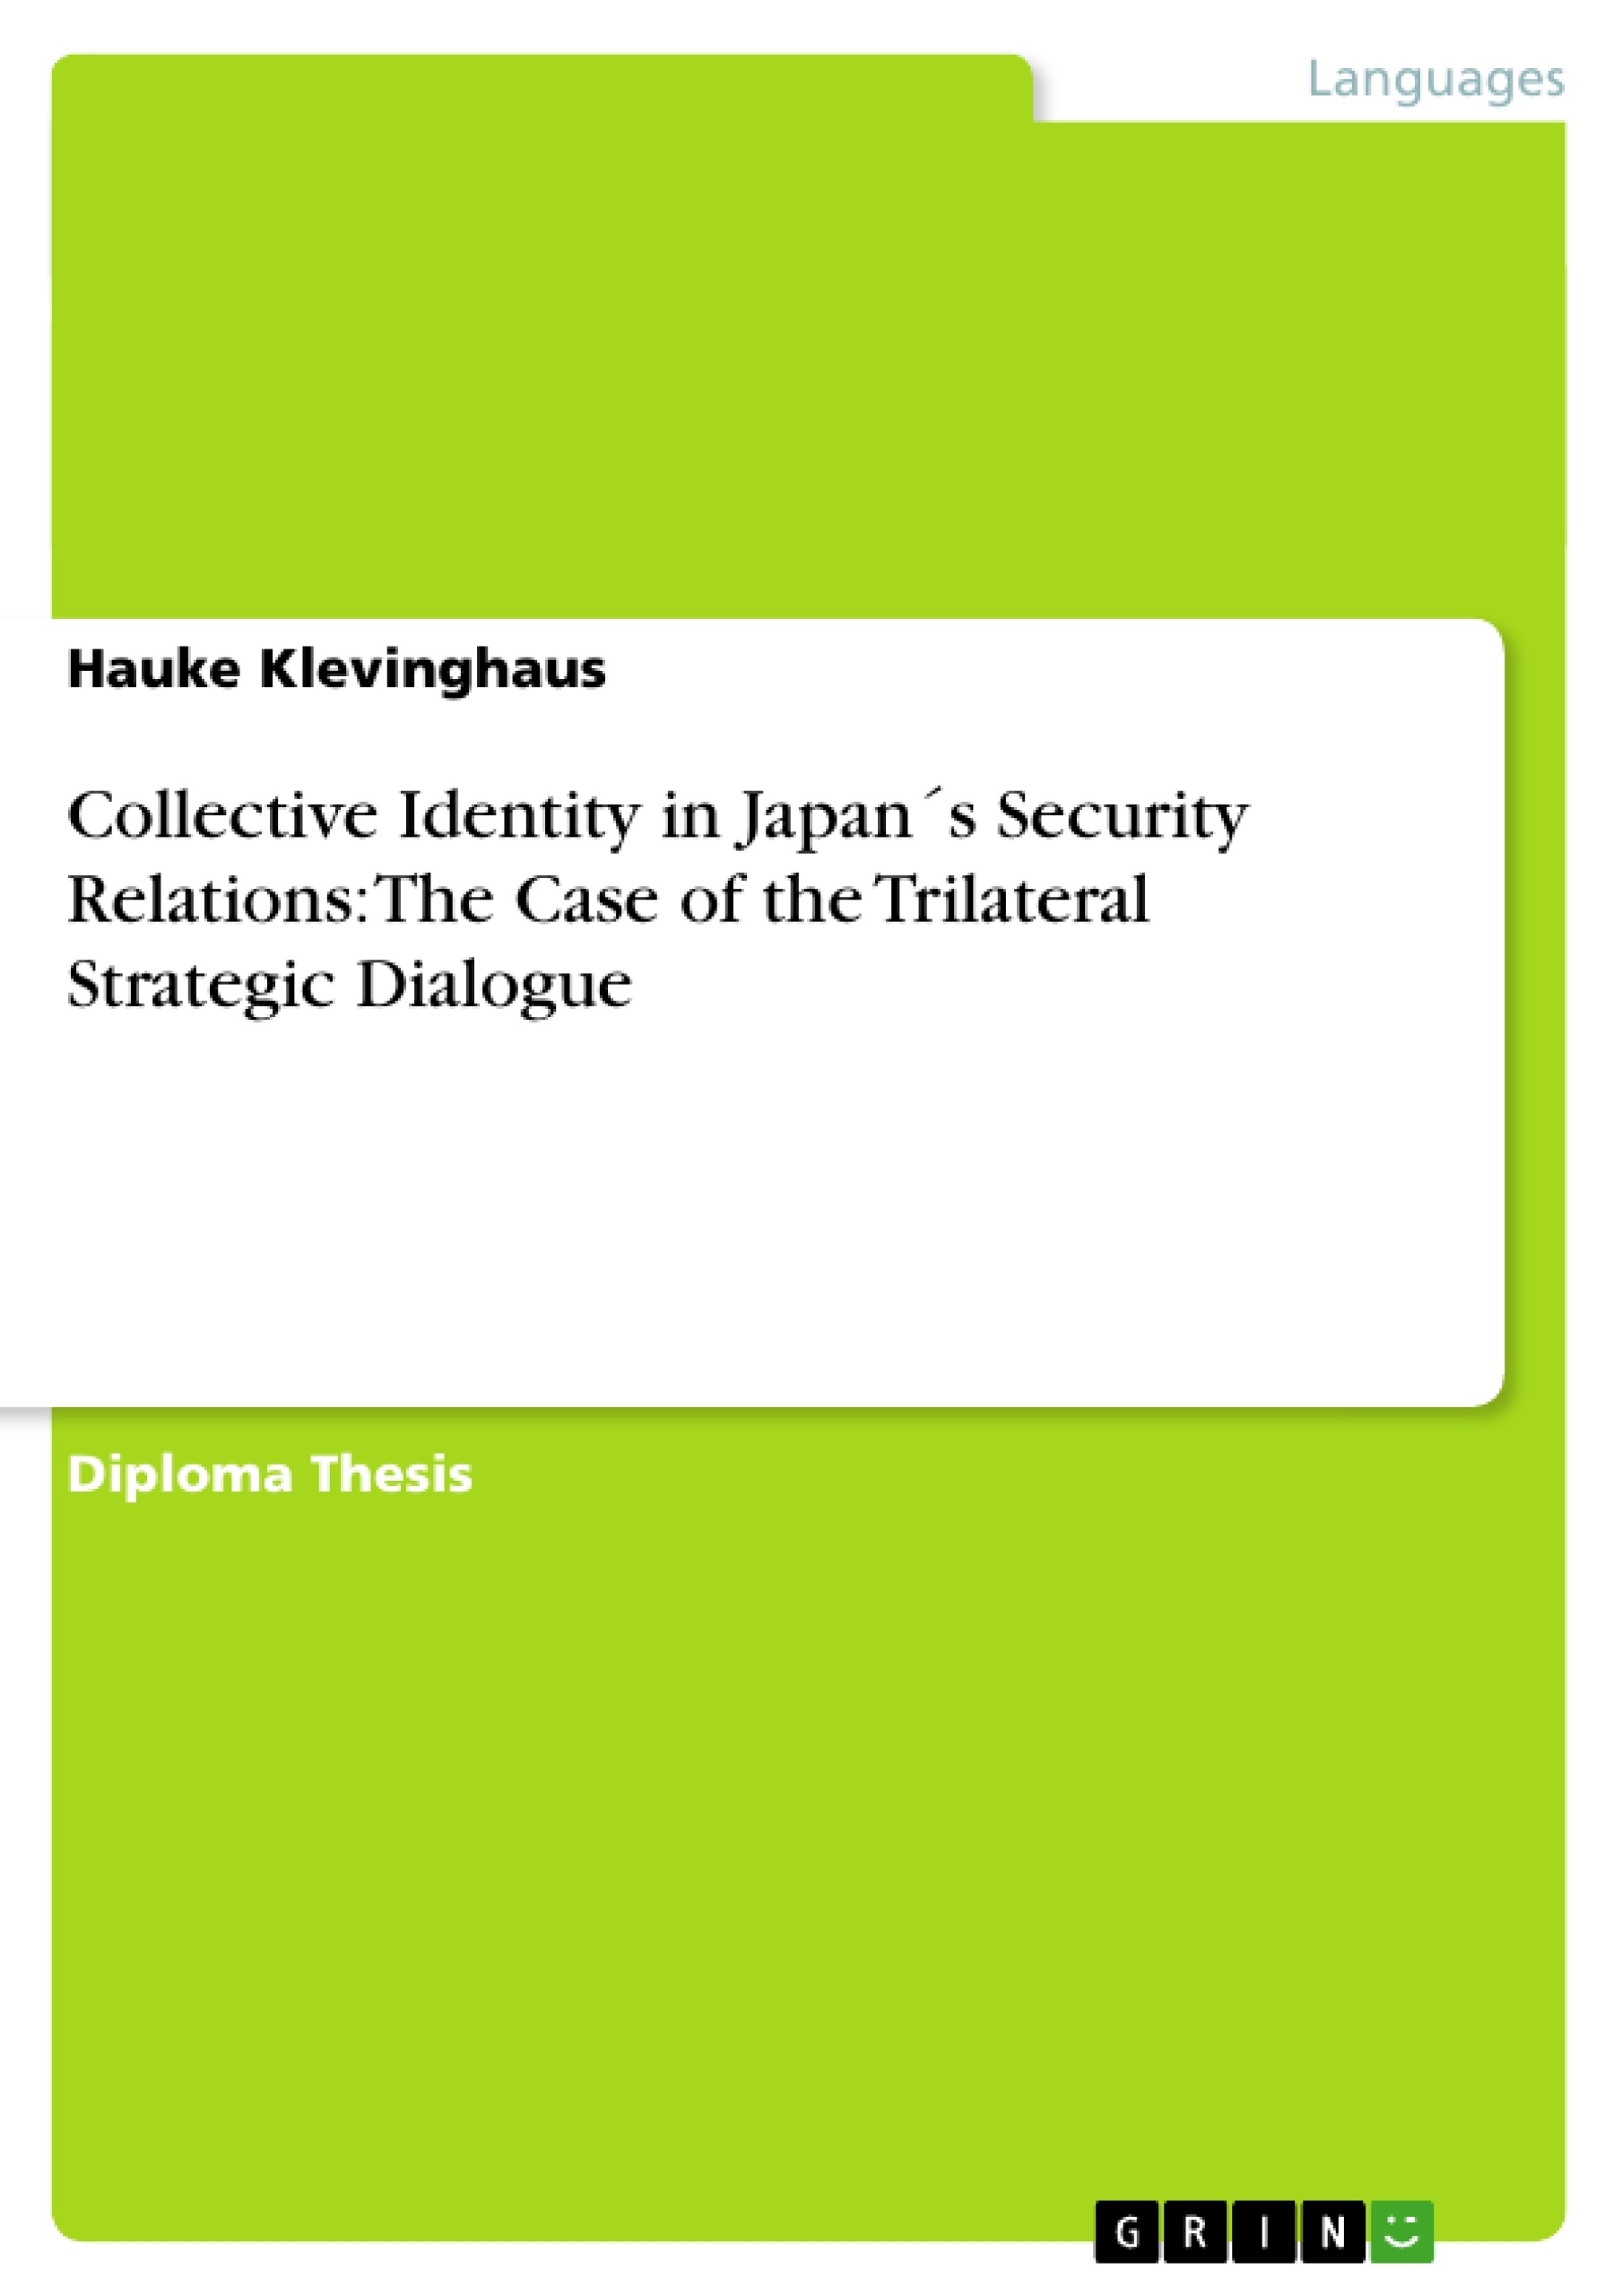 Title: Collective Identity in Japan´s Security Relations: The Case of the Trilateral Strategic Dialogue